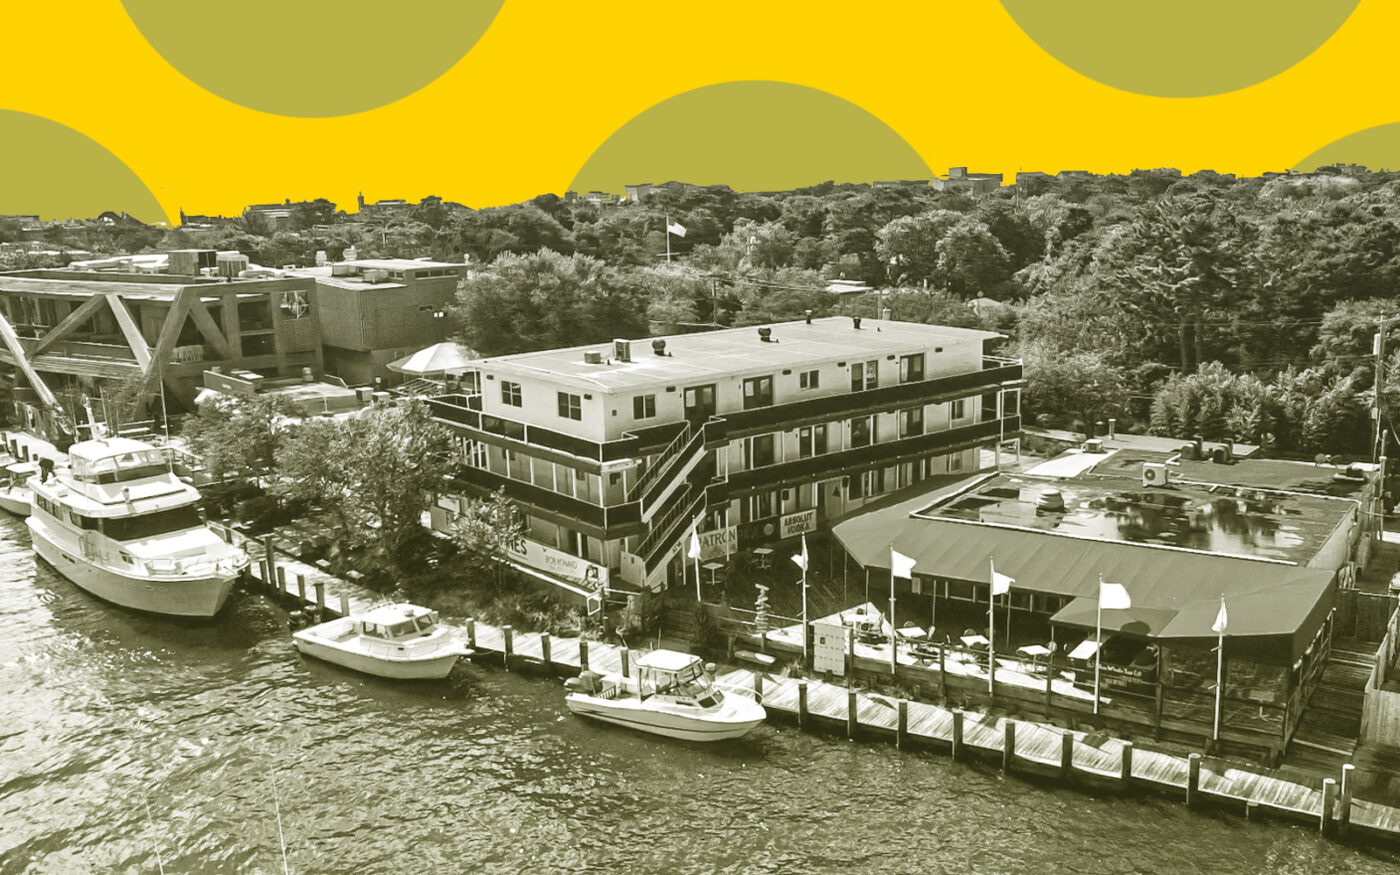 Fire Island Pines Hotel Hits the Market for $17M